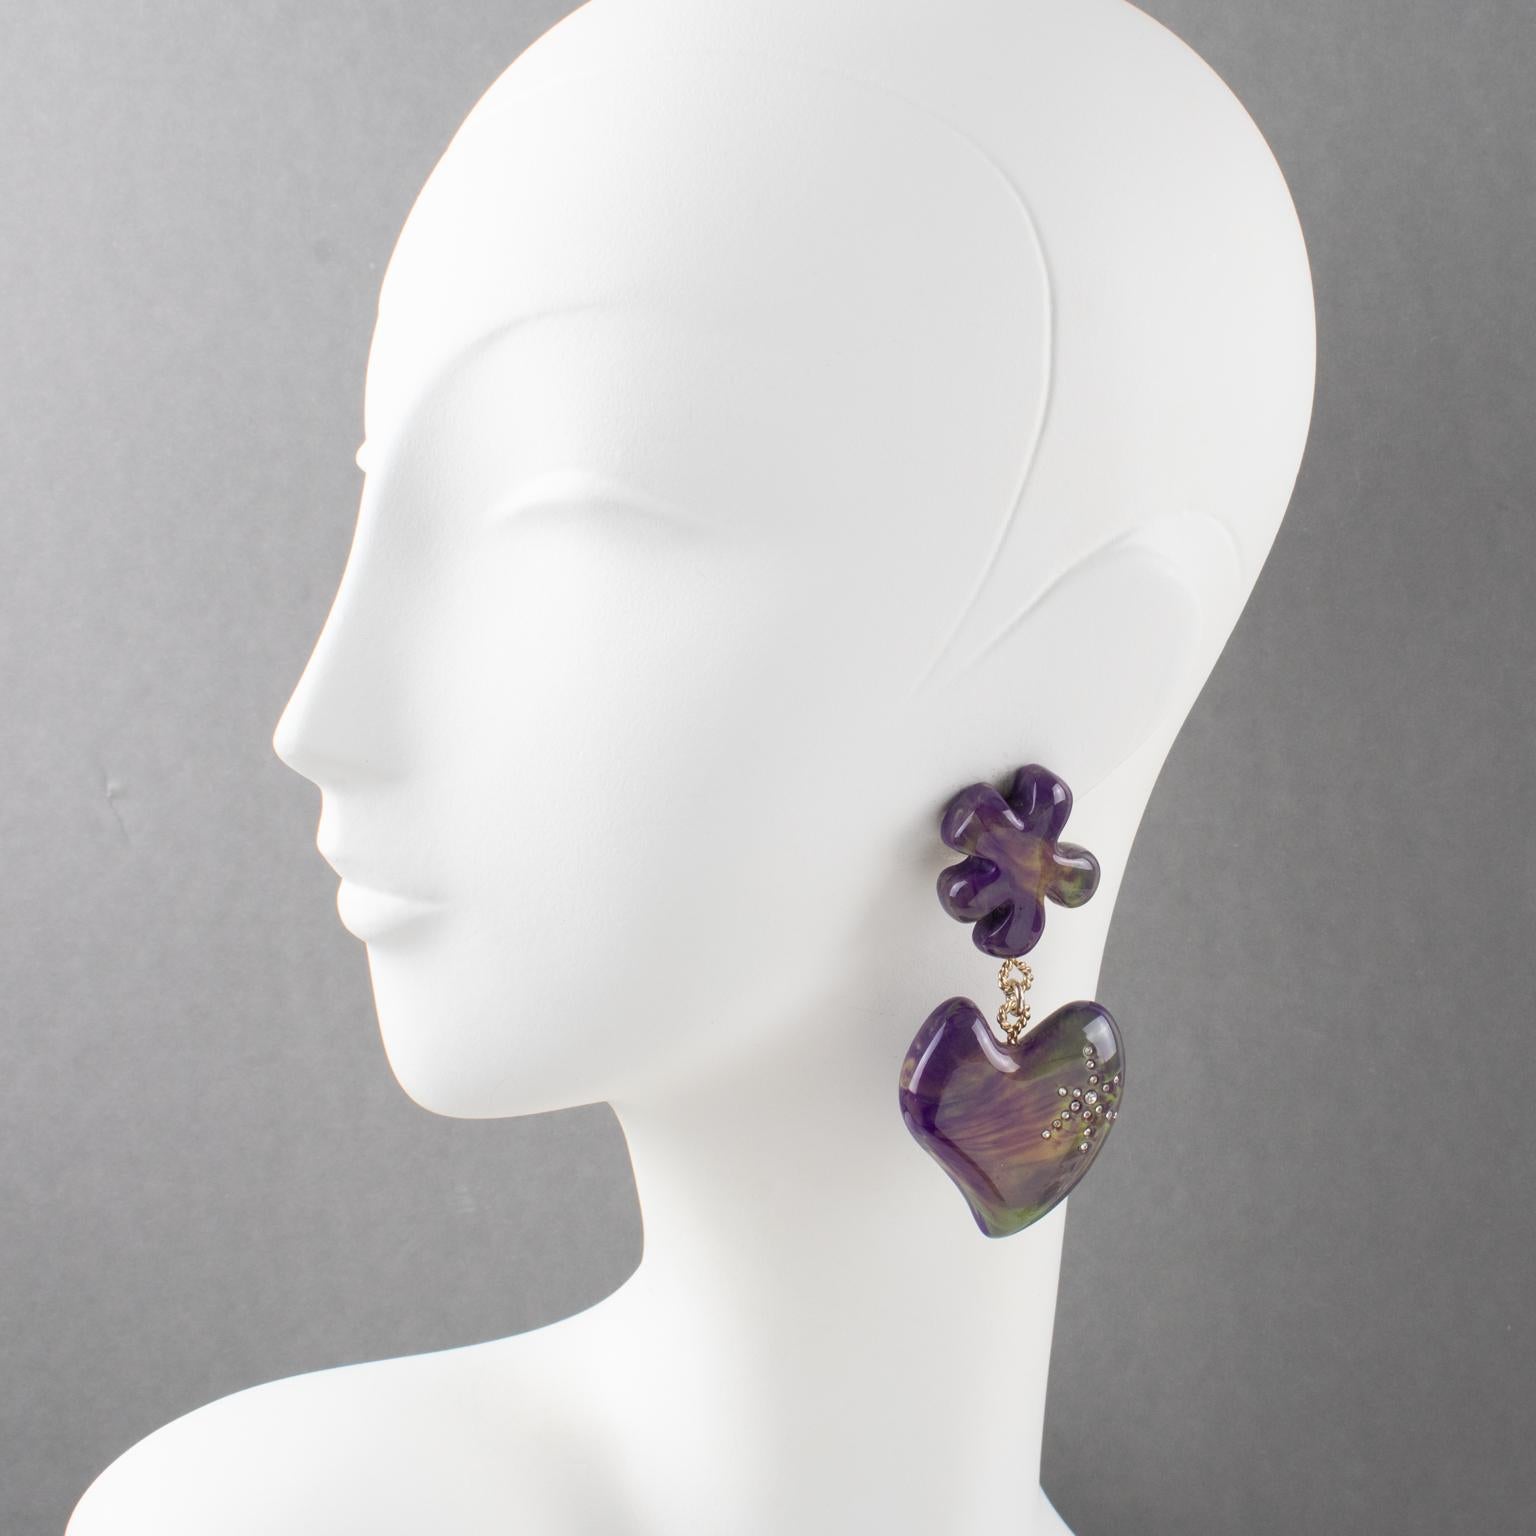 These gorgeous Christian Lacroix Paris signed clip-on earrings feature an oversized resin dangling shape with an abstract flower and heart ornate with clear crystal rhinestones. The pieces boast amethyst purple and wisteria purple, with bright